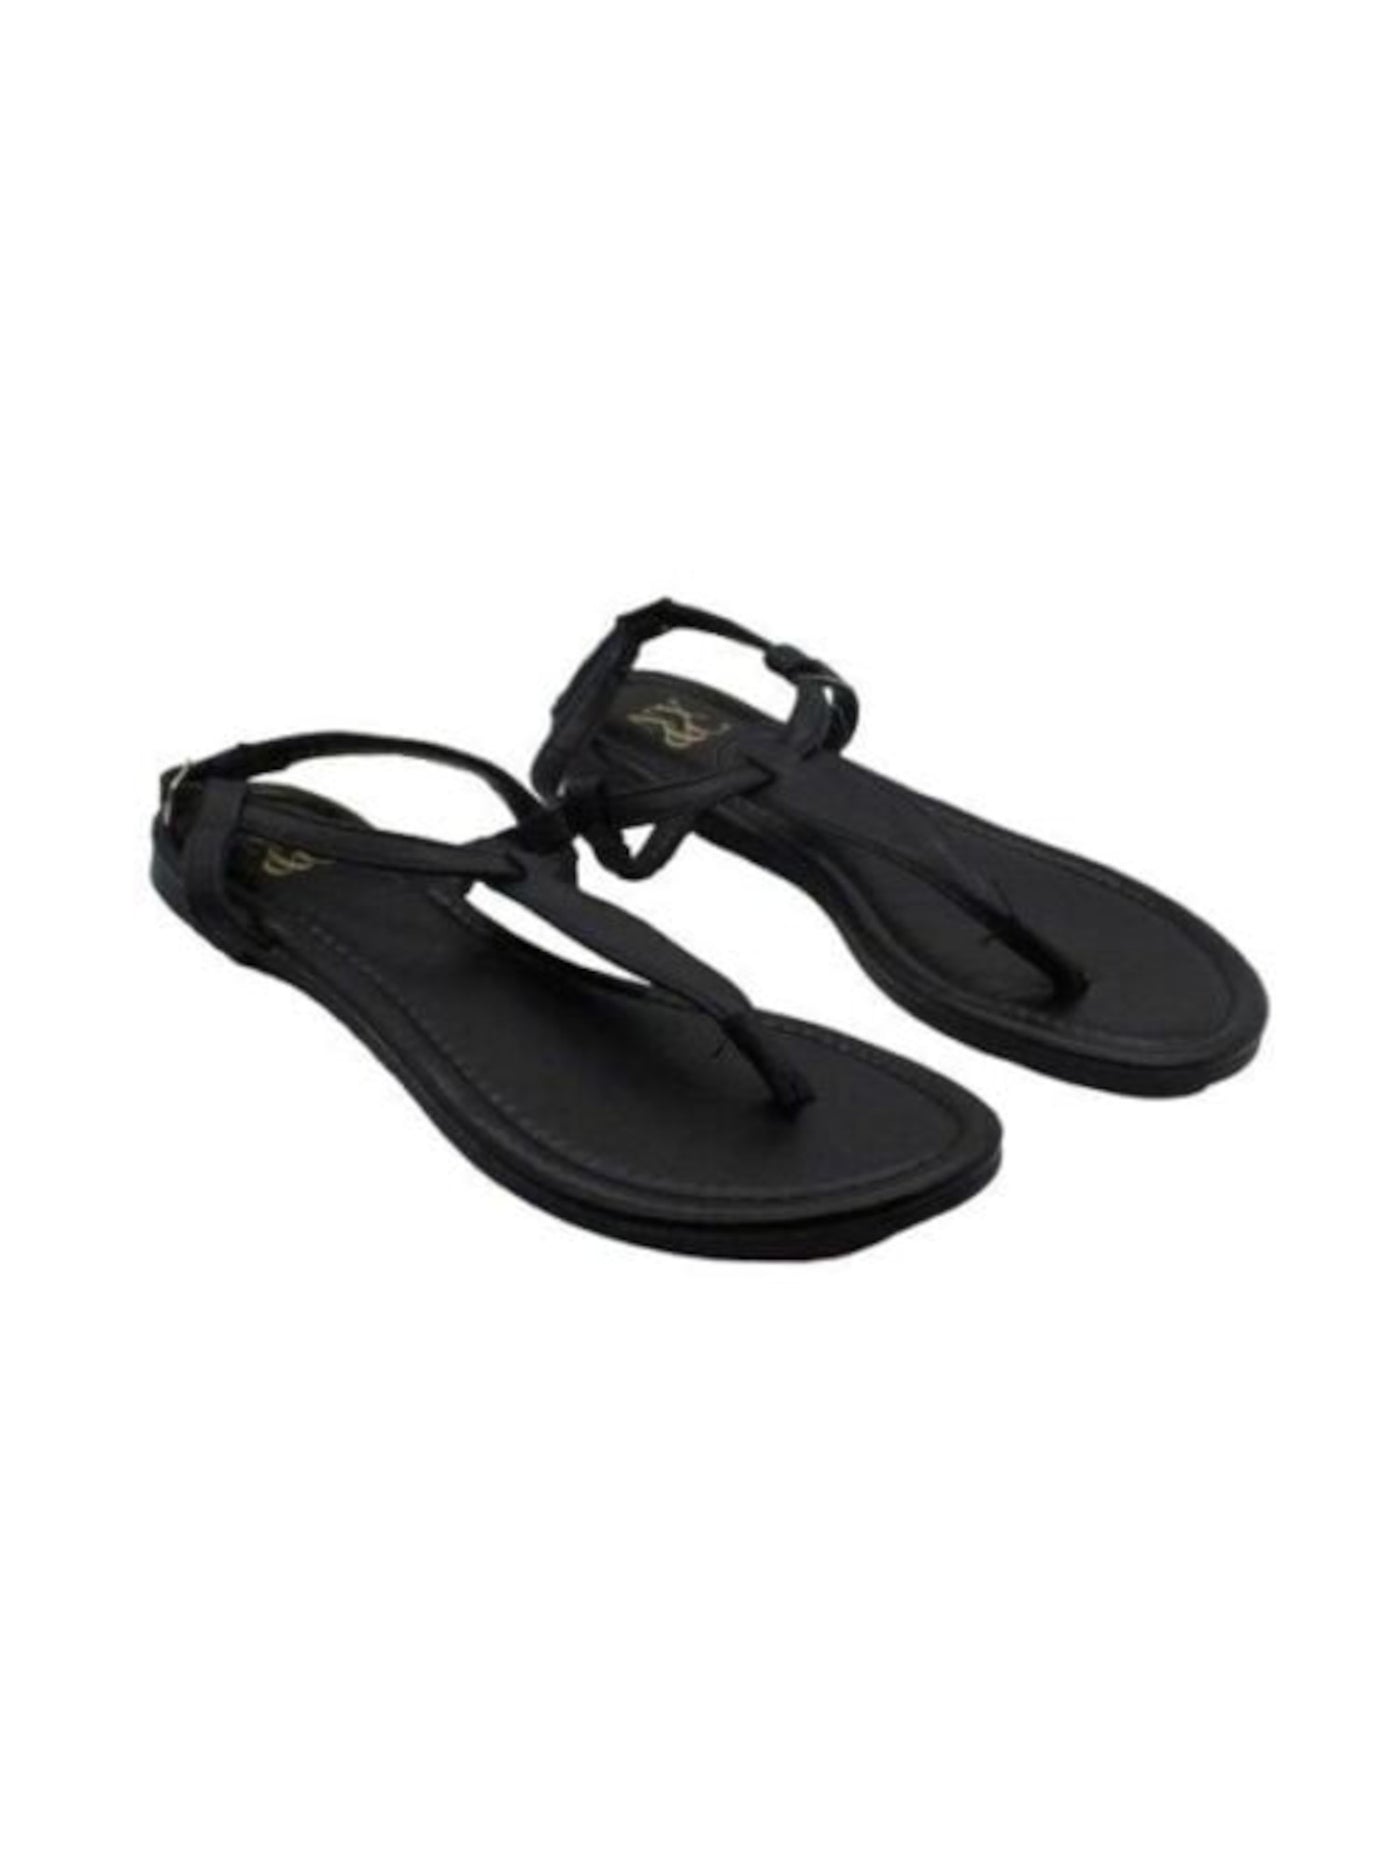 NEW YORK & CO Womens Black T-Strap Ankle Strap Adjustable Padded Katie Round Toe Buckle Thong Sandals Shoes 9